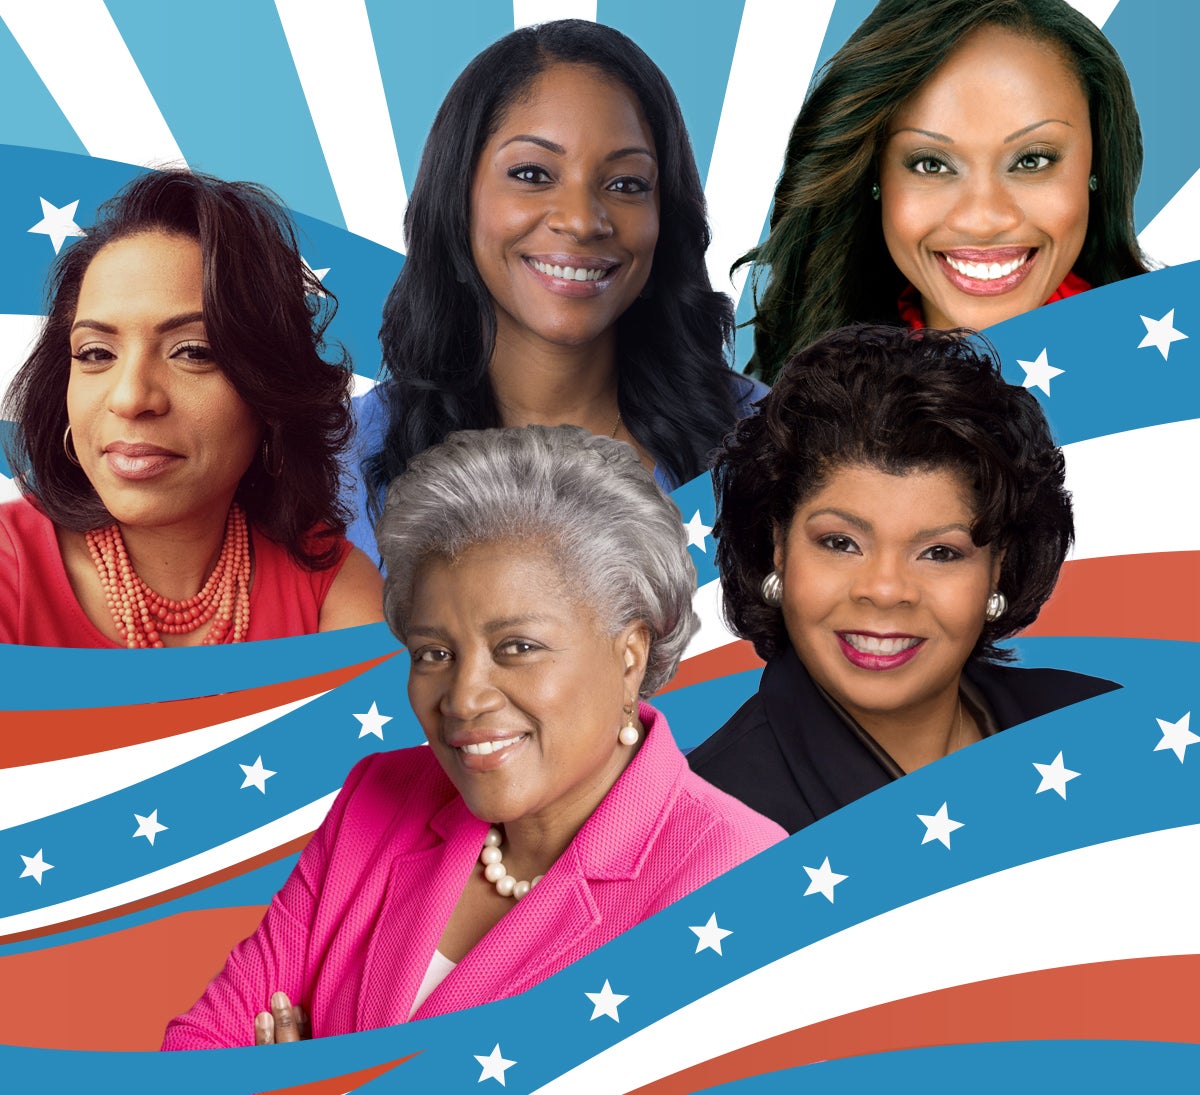 #WeDecide2016: Political Pundits Weigh in on Which Candidates Are Best for Black Women